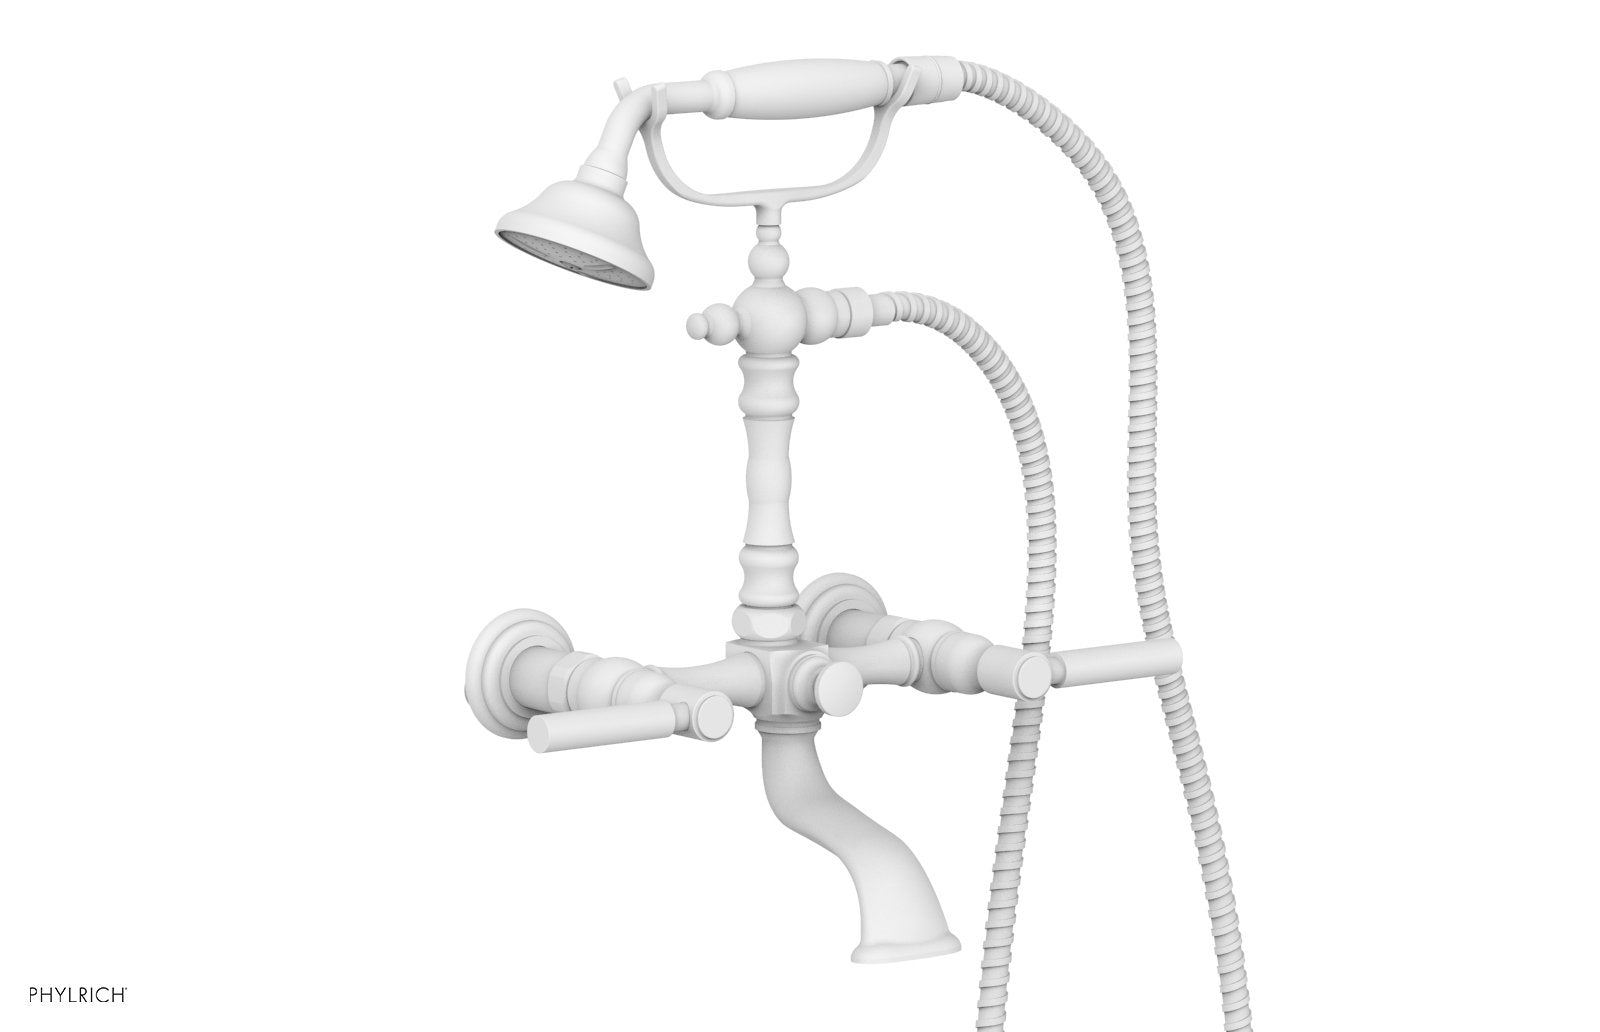 Phylrich BASIC Exposed Tub & Hand Shower - Lever Handle